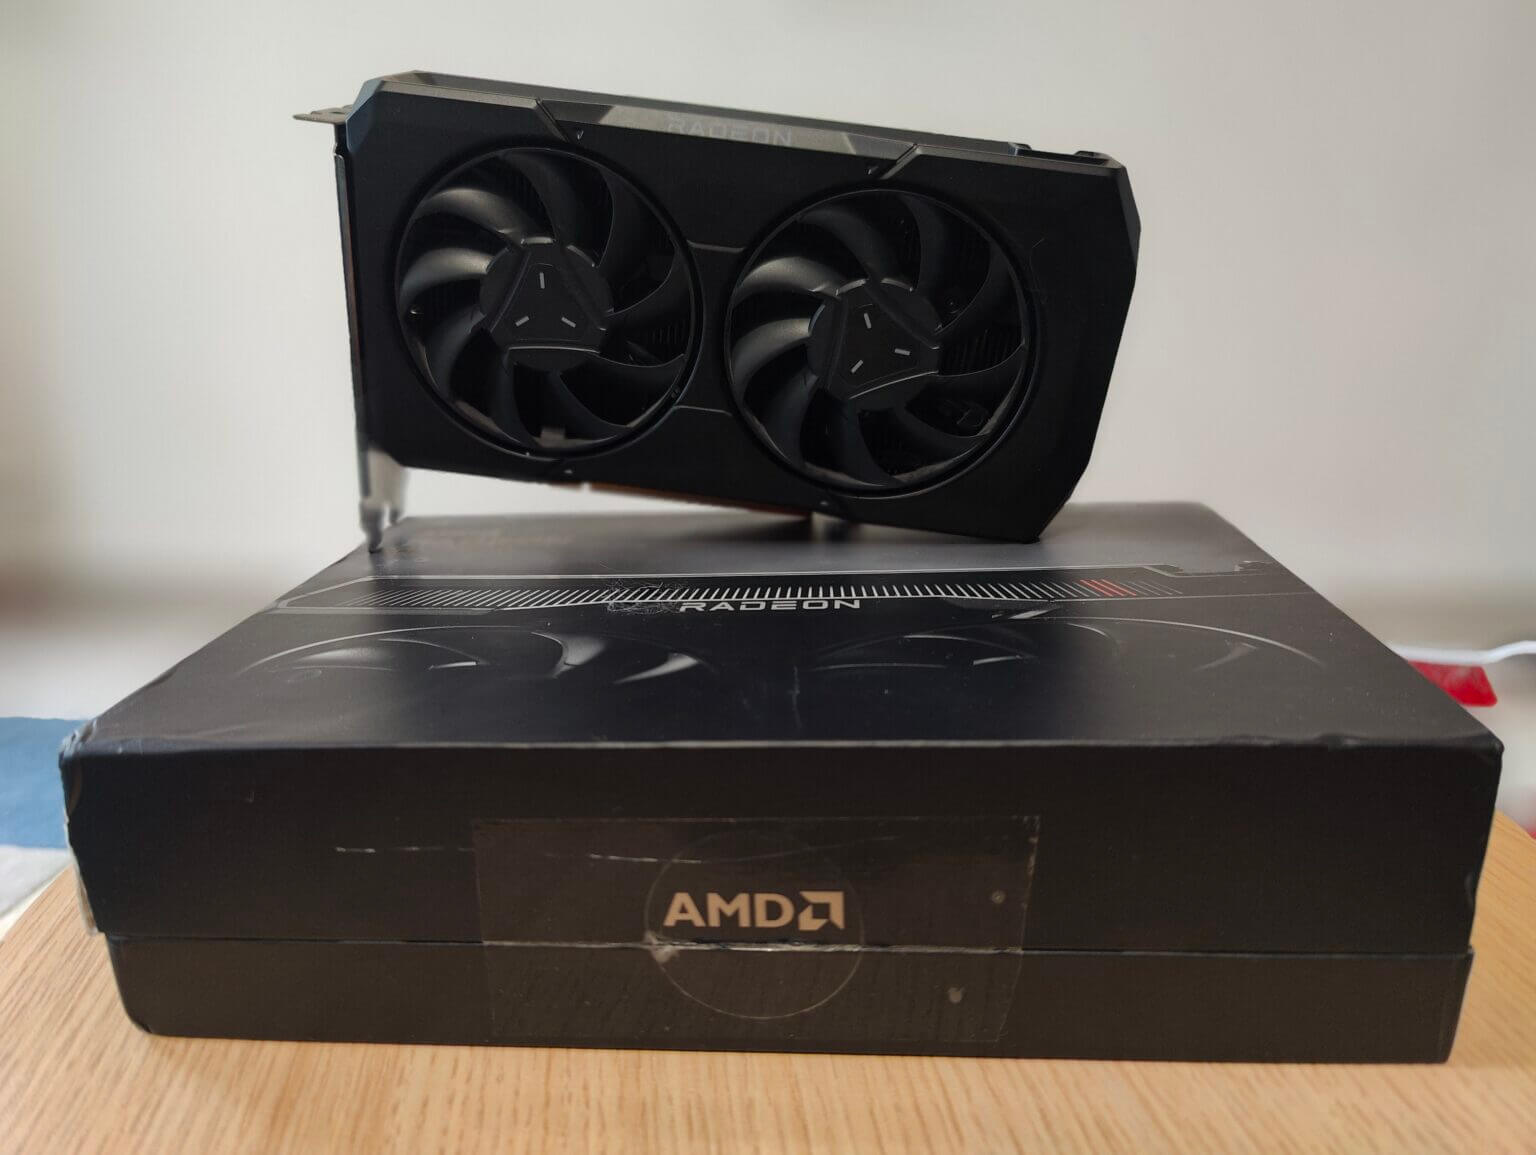 amd-tackles-the-1440p-market-with-new-rx-7800-xt-and-rx-7700-xt-gpus